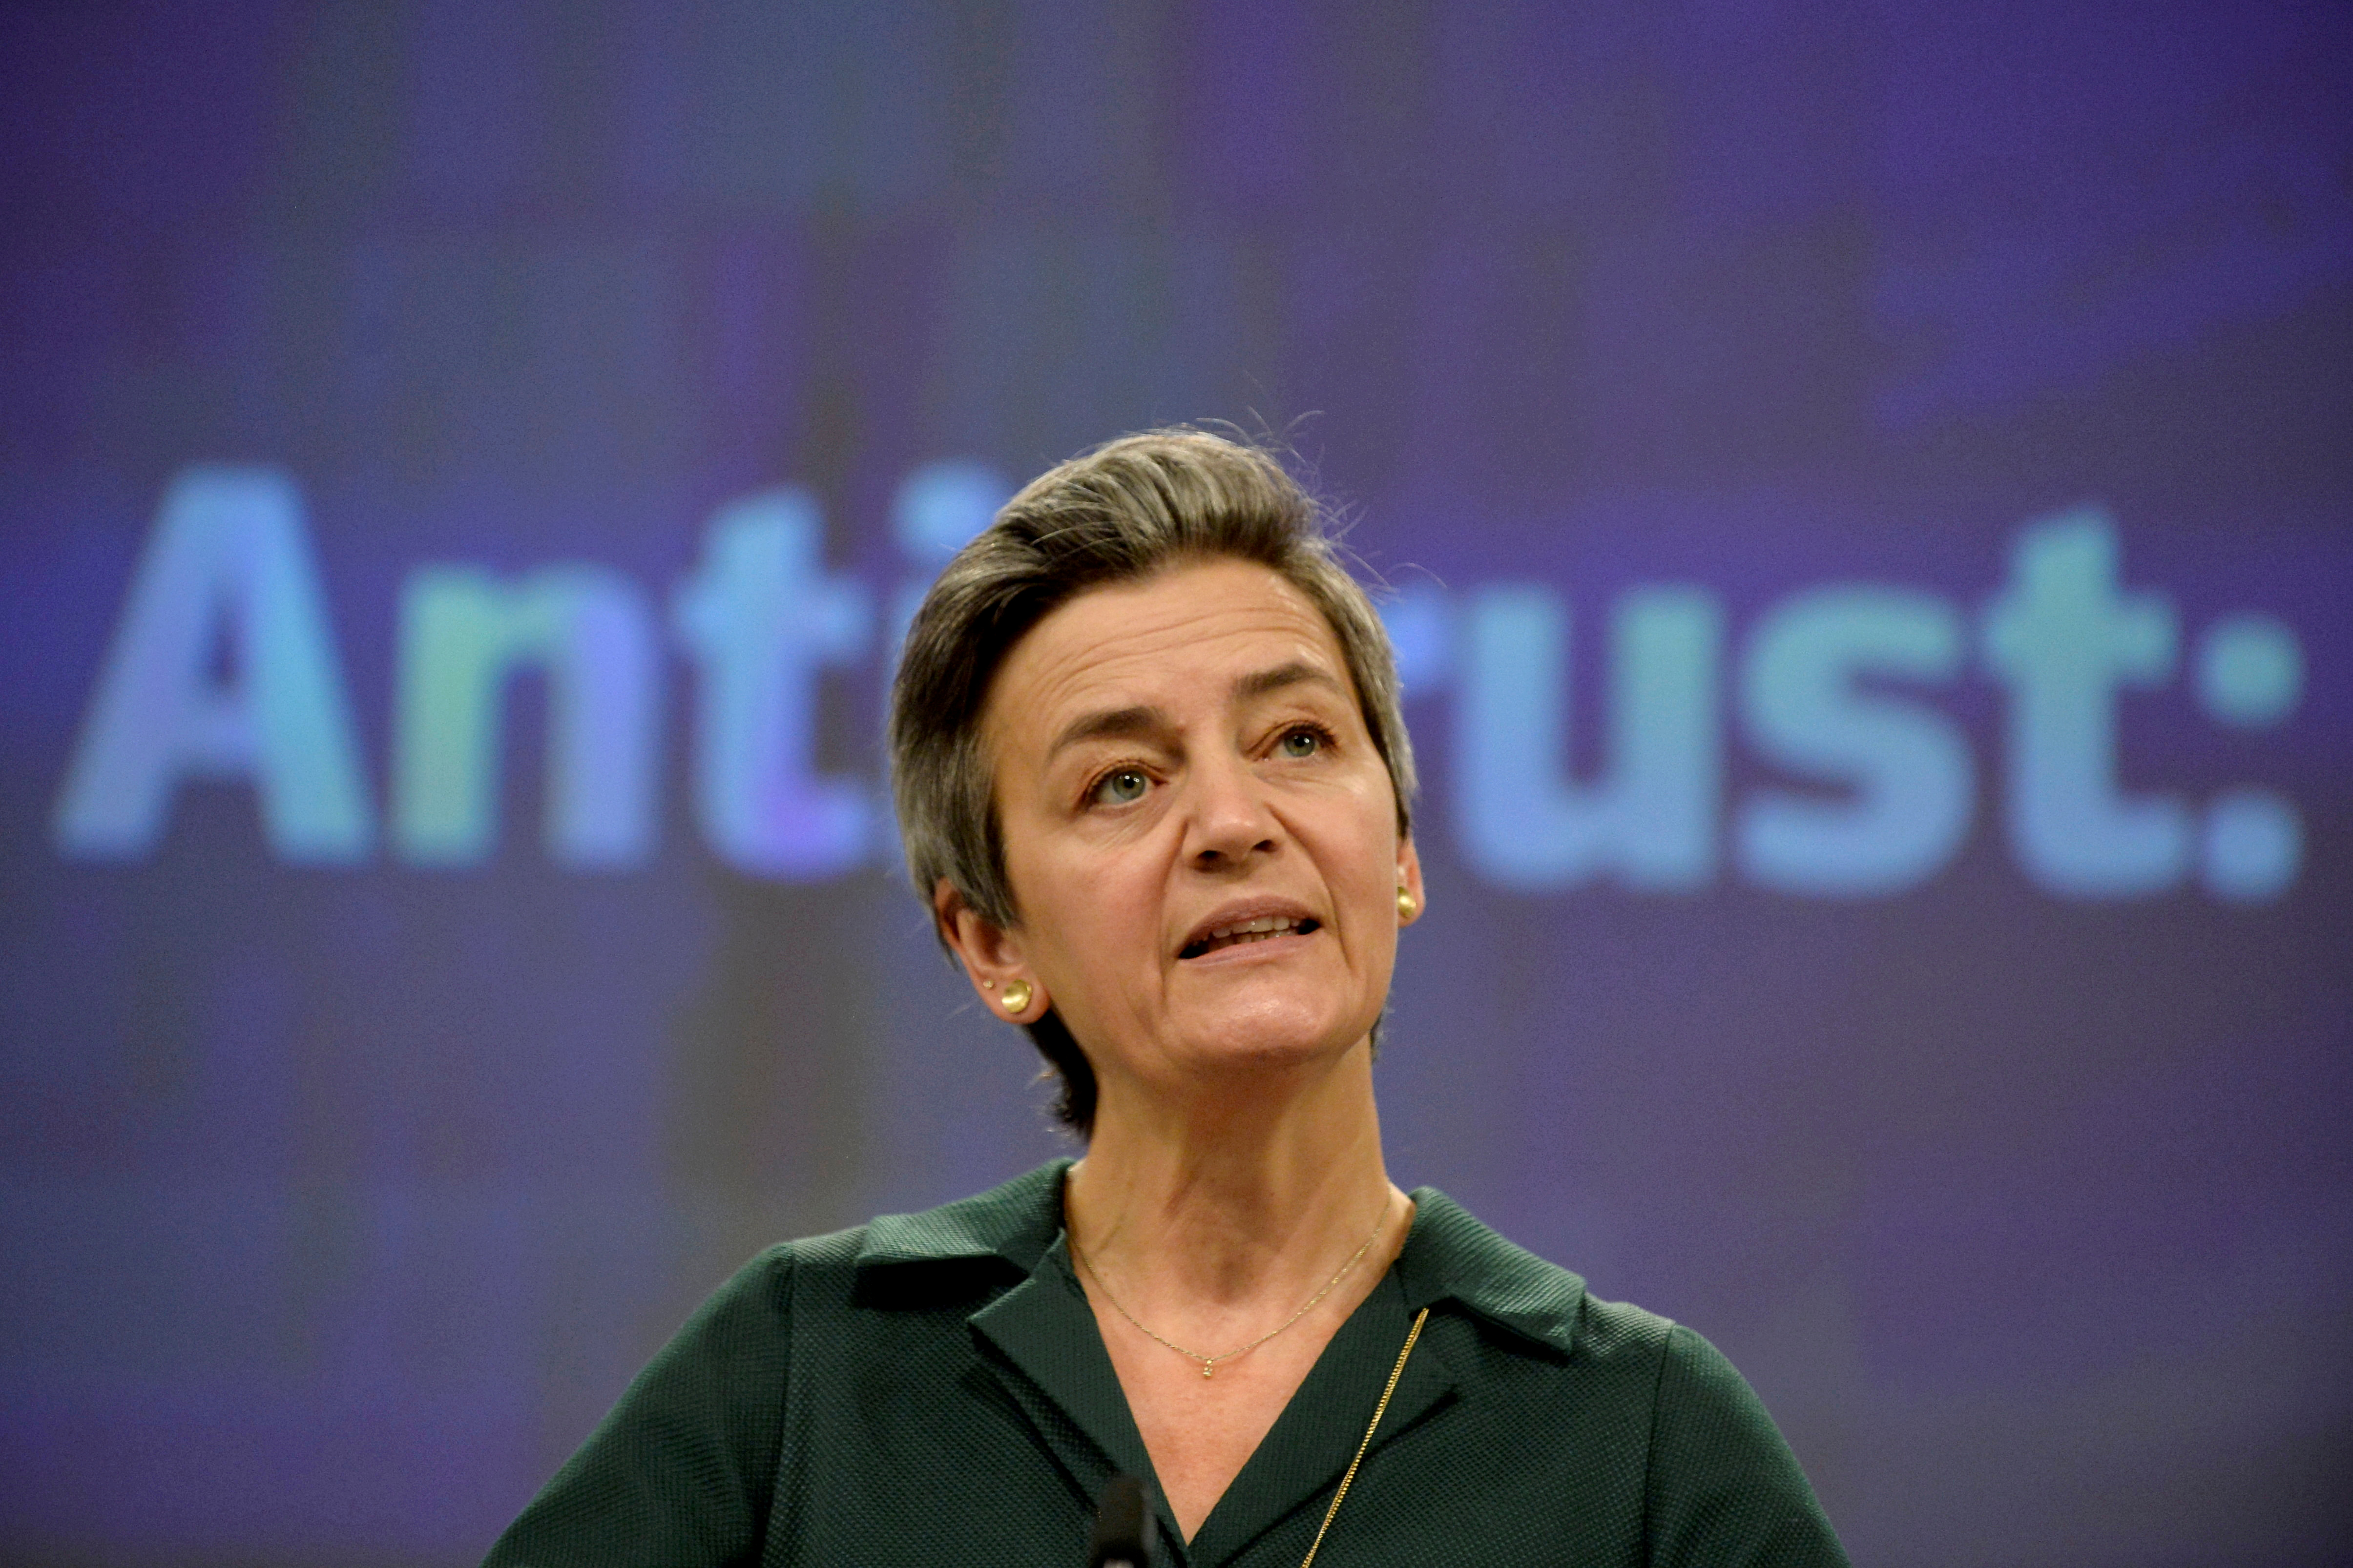 EU antitrust chief Margrethe Vestager gives a news conference on antitrust case at European Commission in Brussels